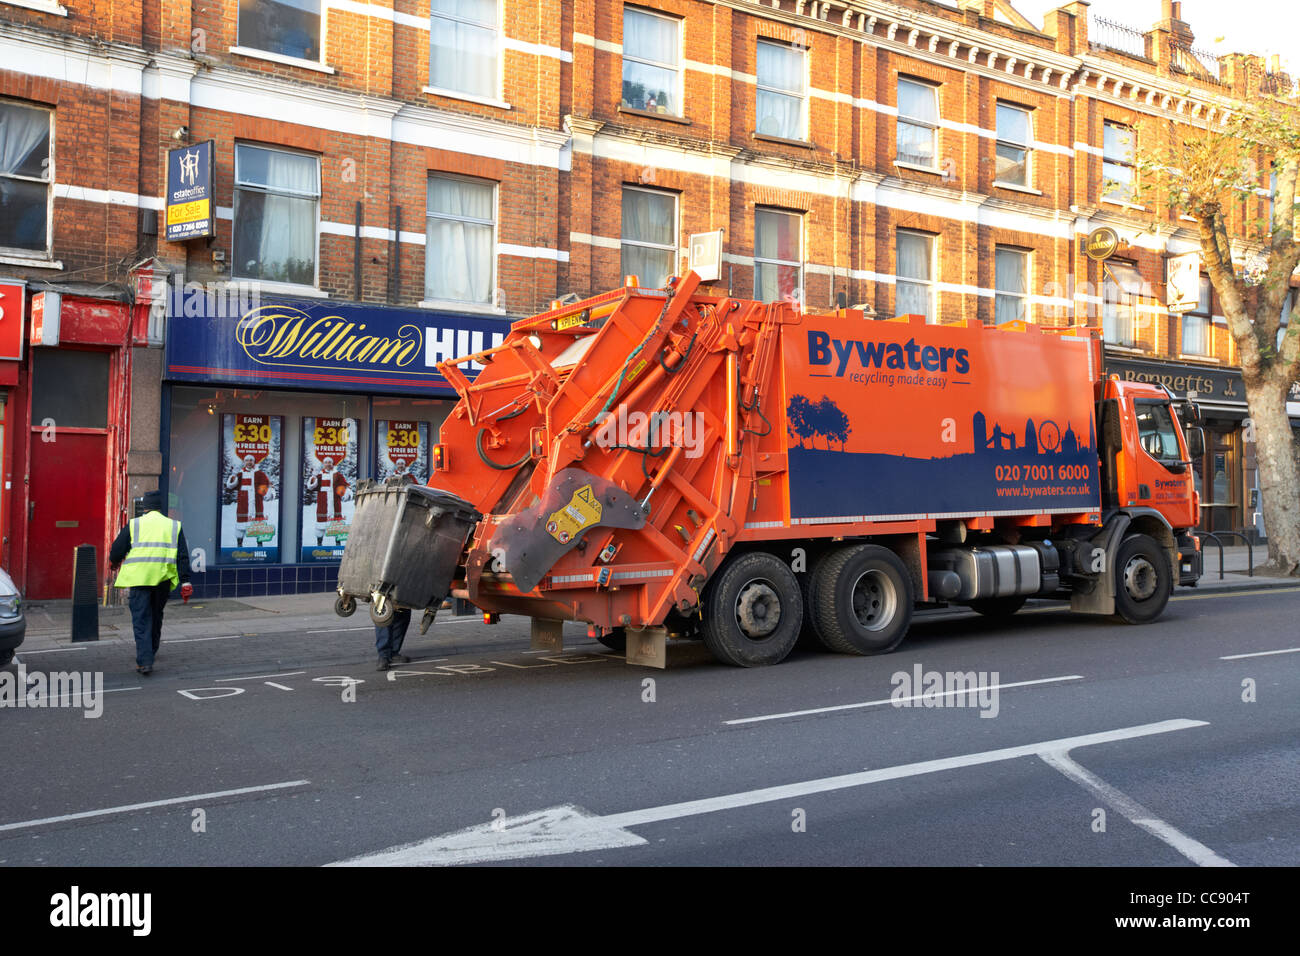 bywaters waste management recycling truck bin emptying London England UK United kingdom Stock Photo